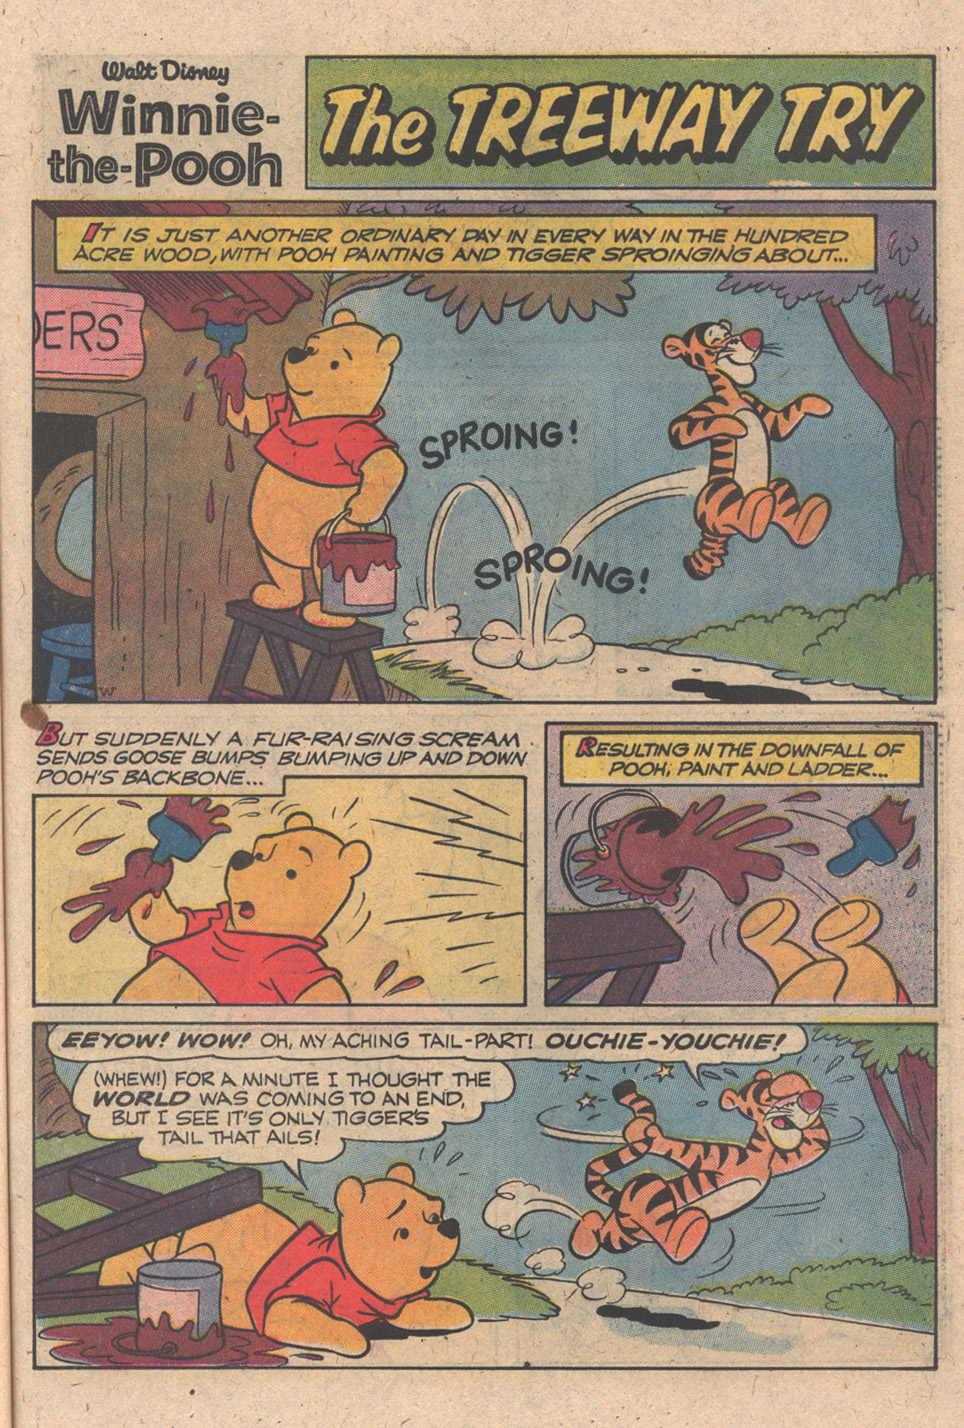 Read online Winnie-the-Pooh comic -  Issue #14 - 23